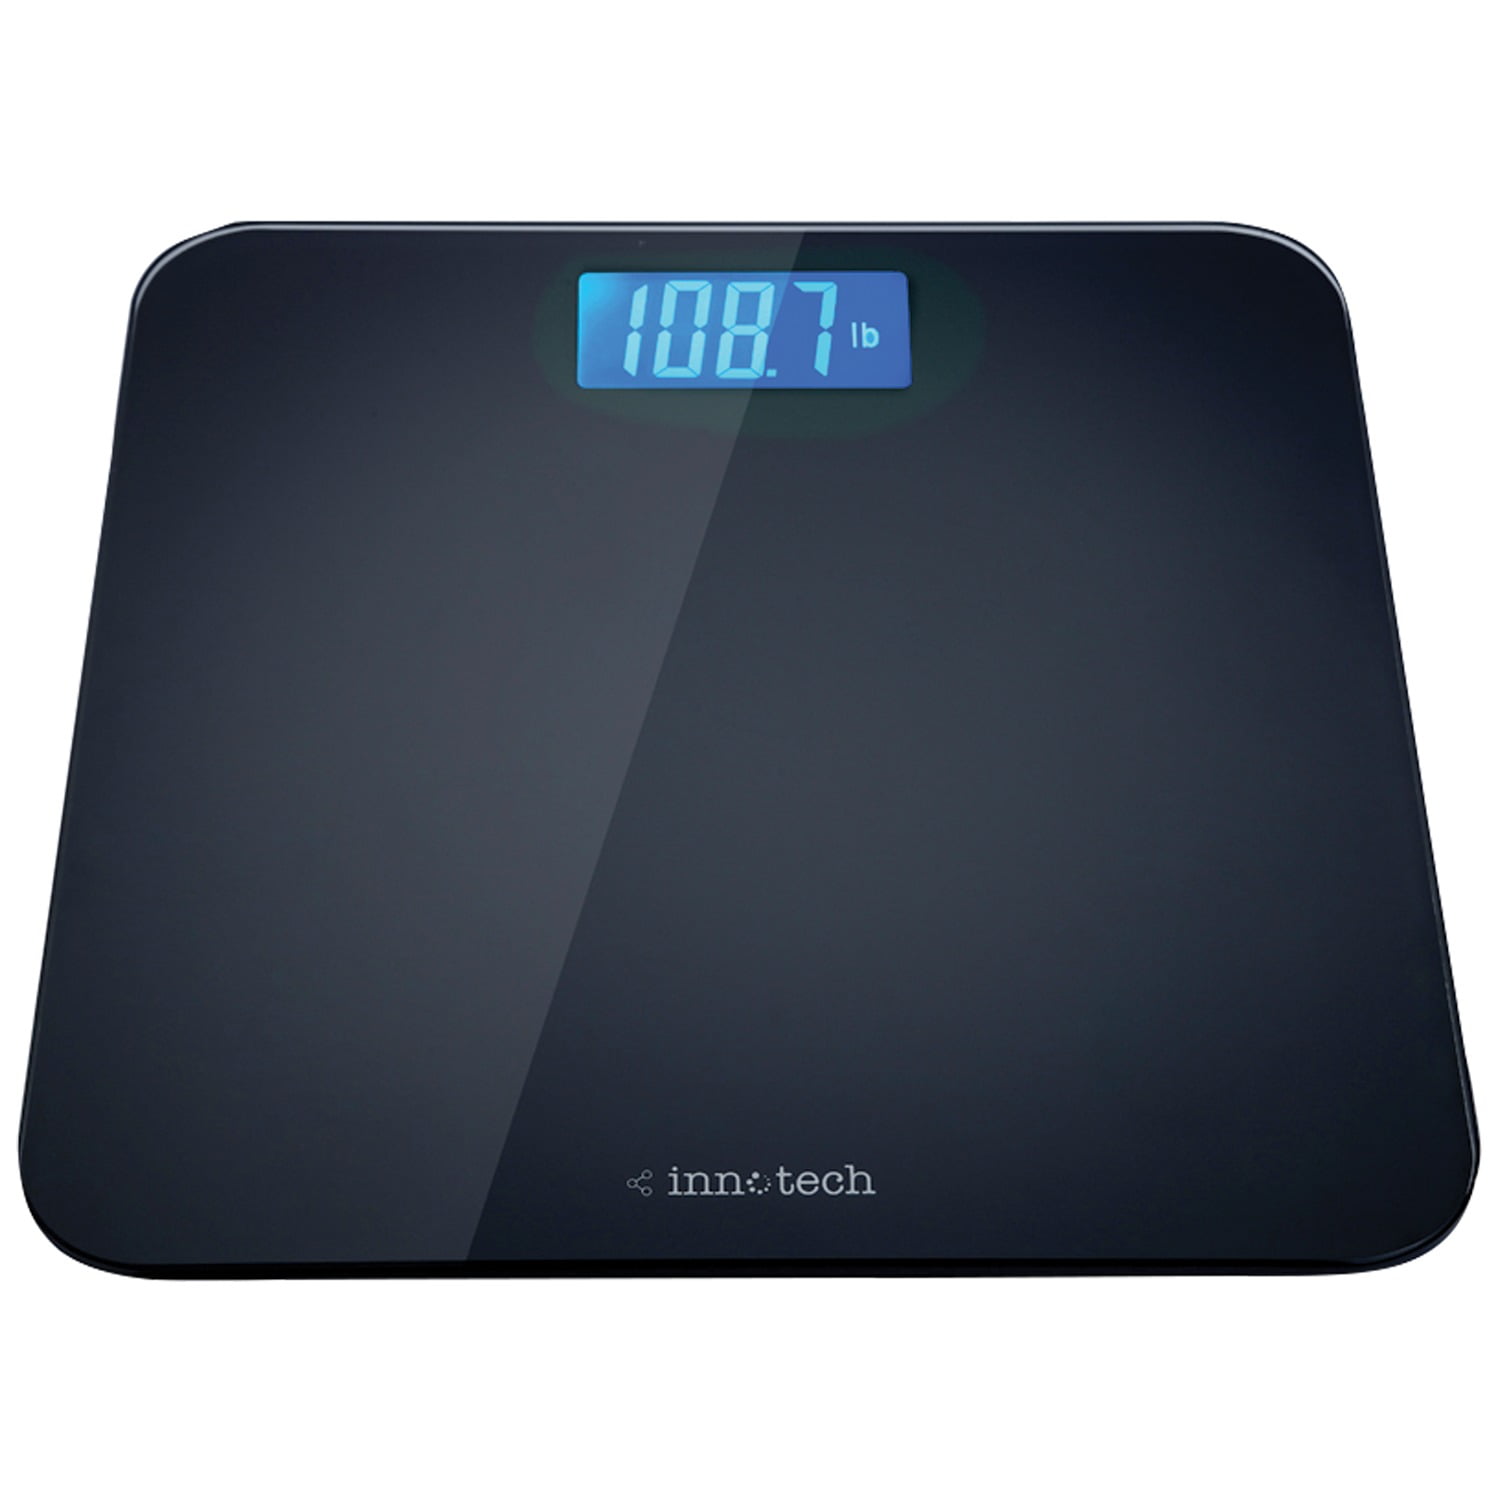 Zimtown 397Lb Digital Body Weight Bathroom Scale With Step-On Technology 